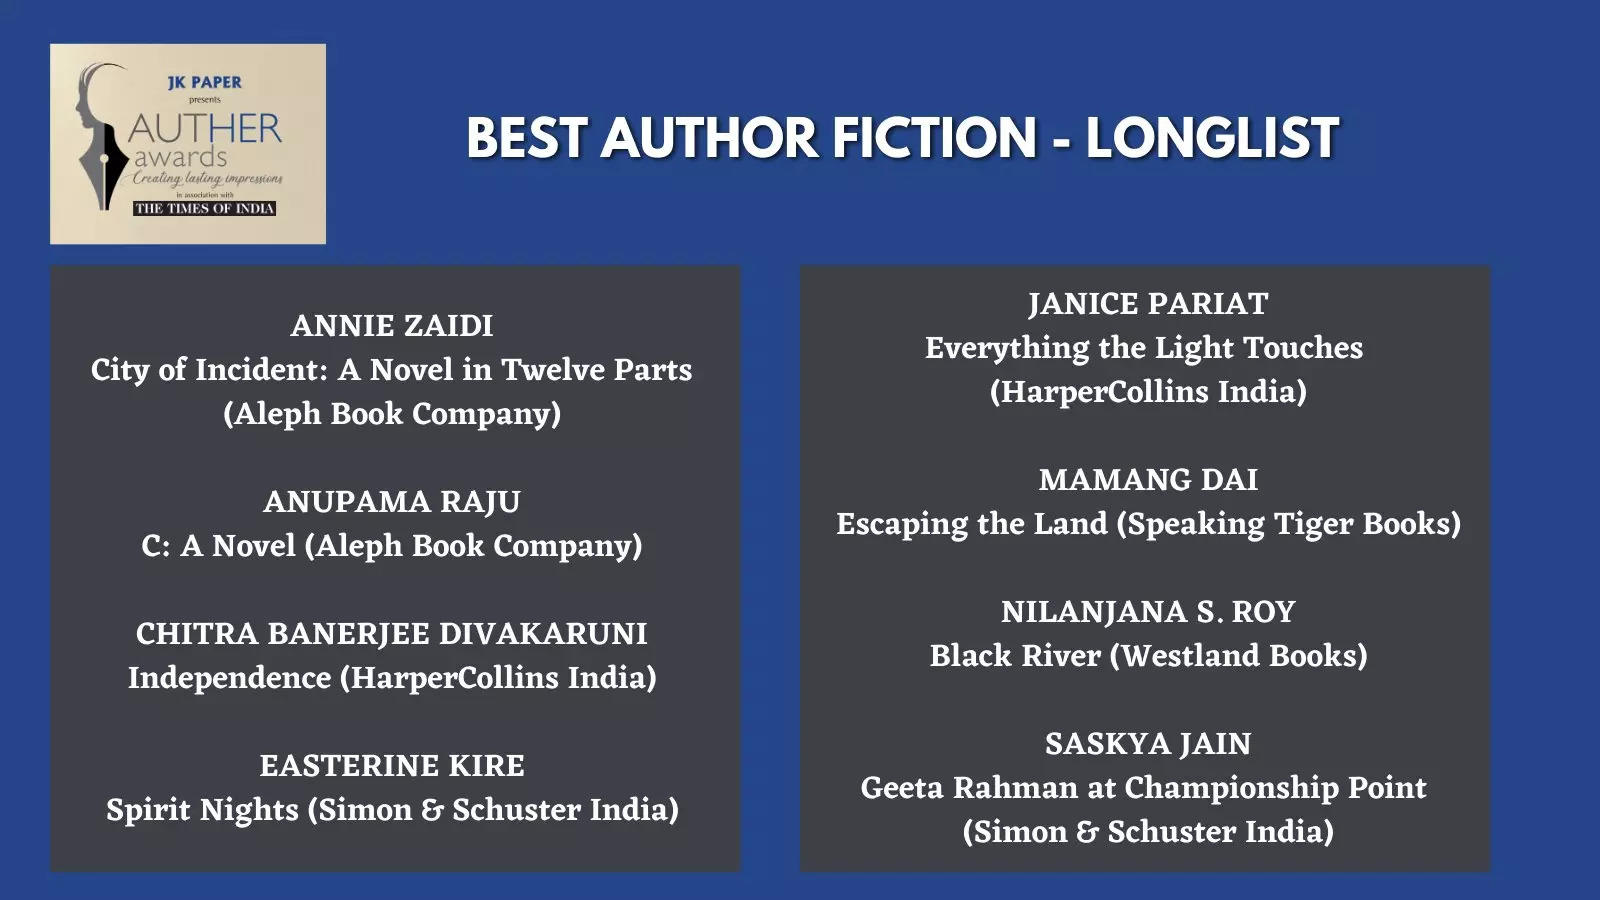 other longlist fiction